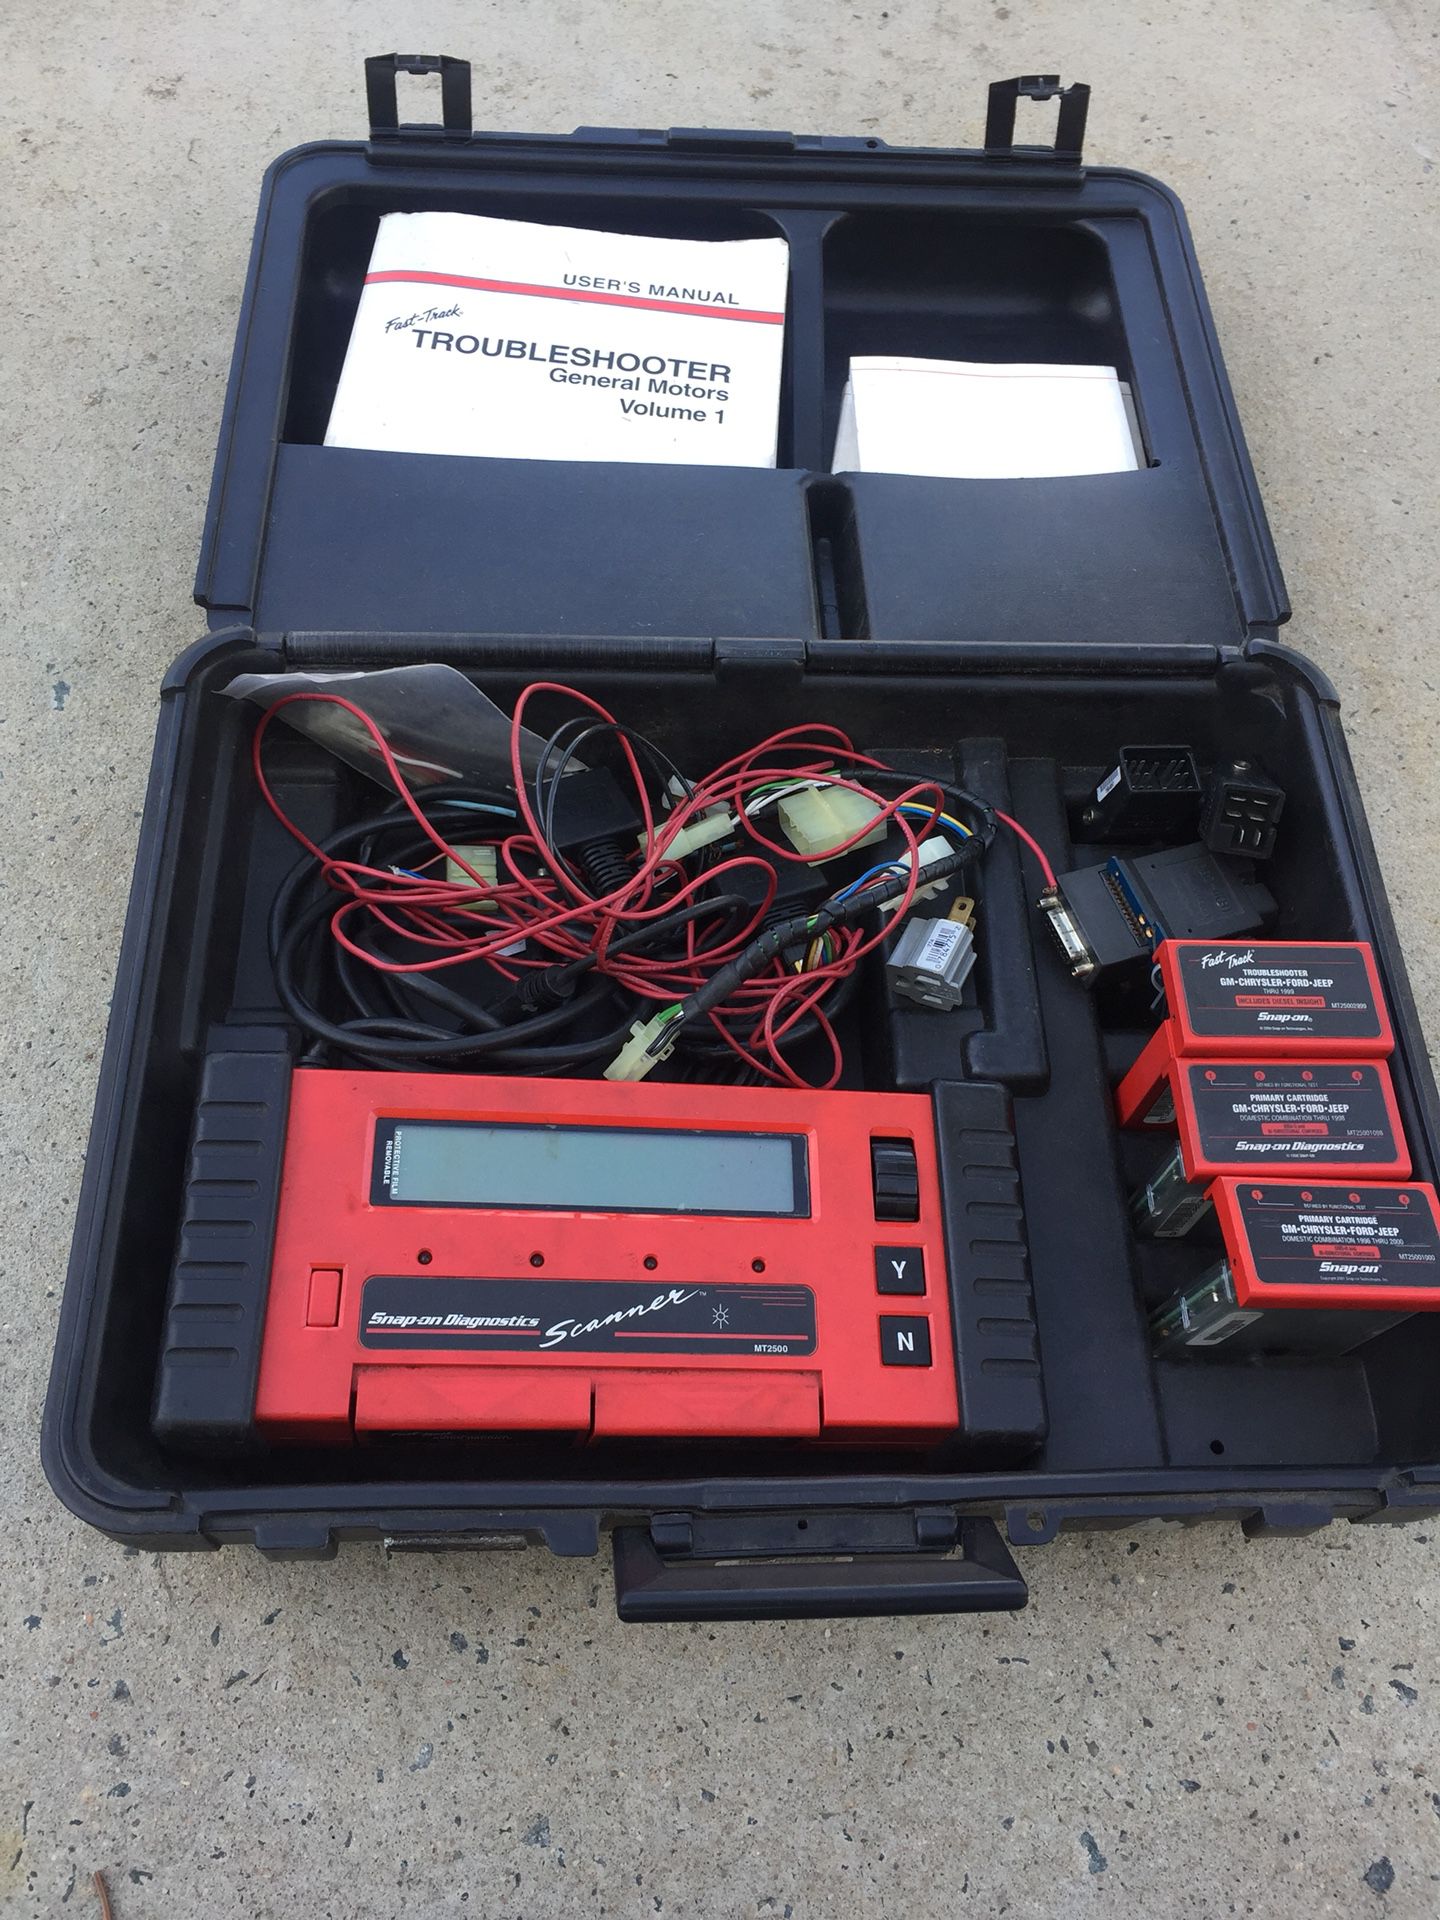 Snap on diagnostic tool with case.